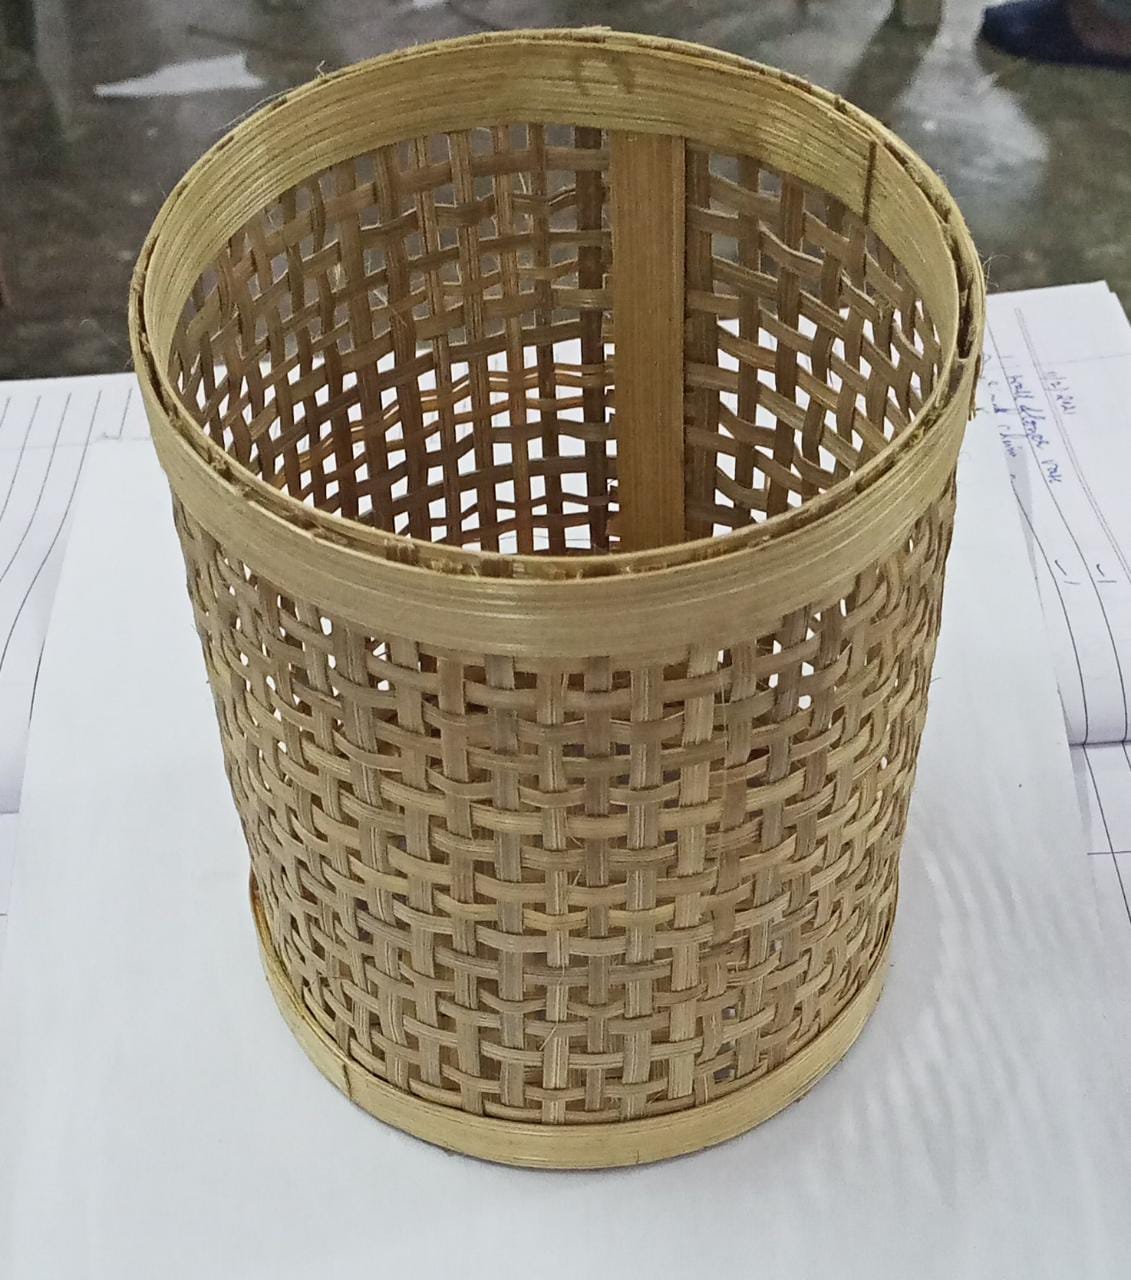 Bamboo dustbin made by trainee